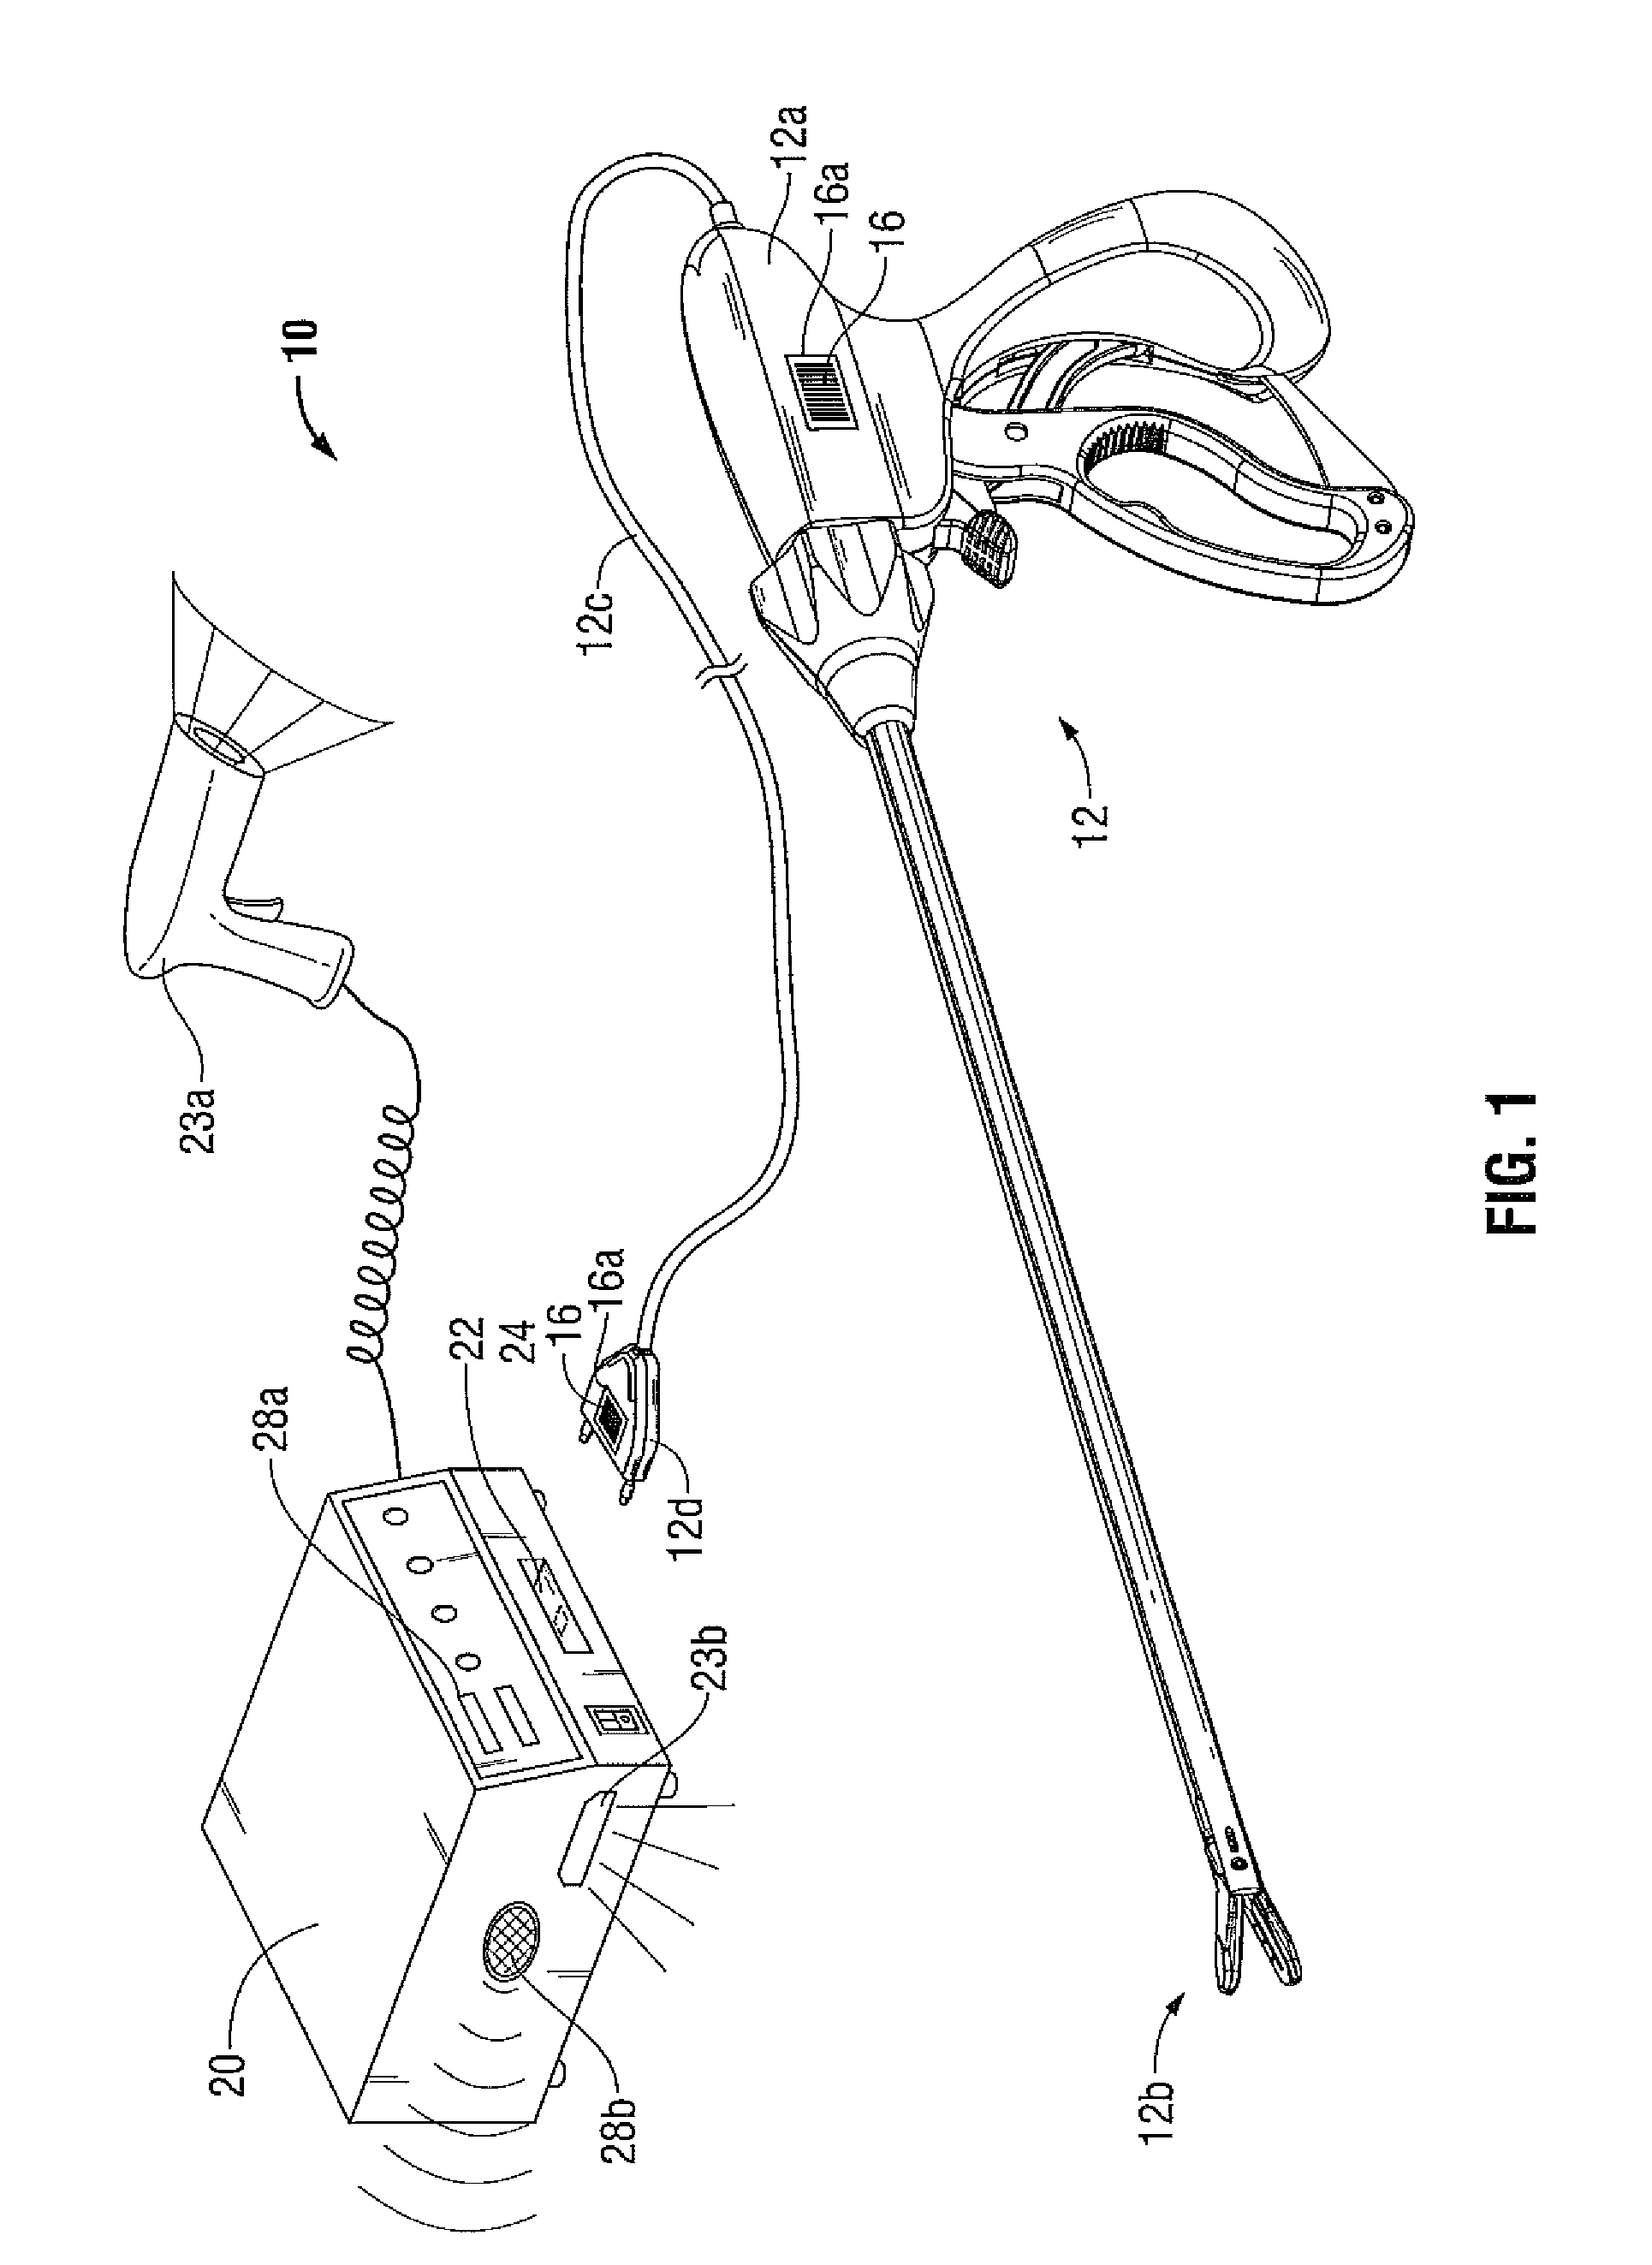 Removable ink for surgical instrument